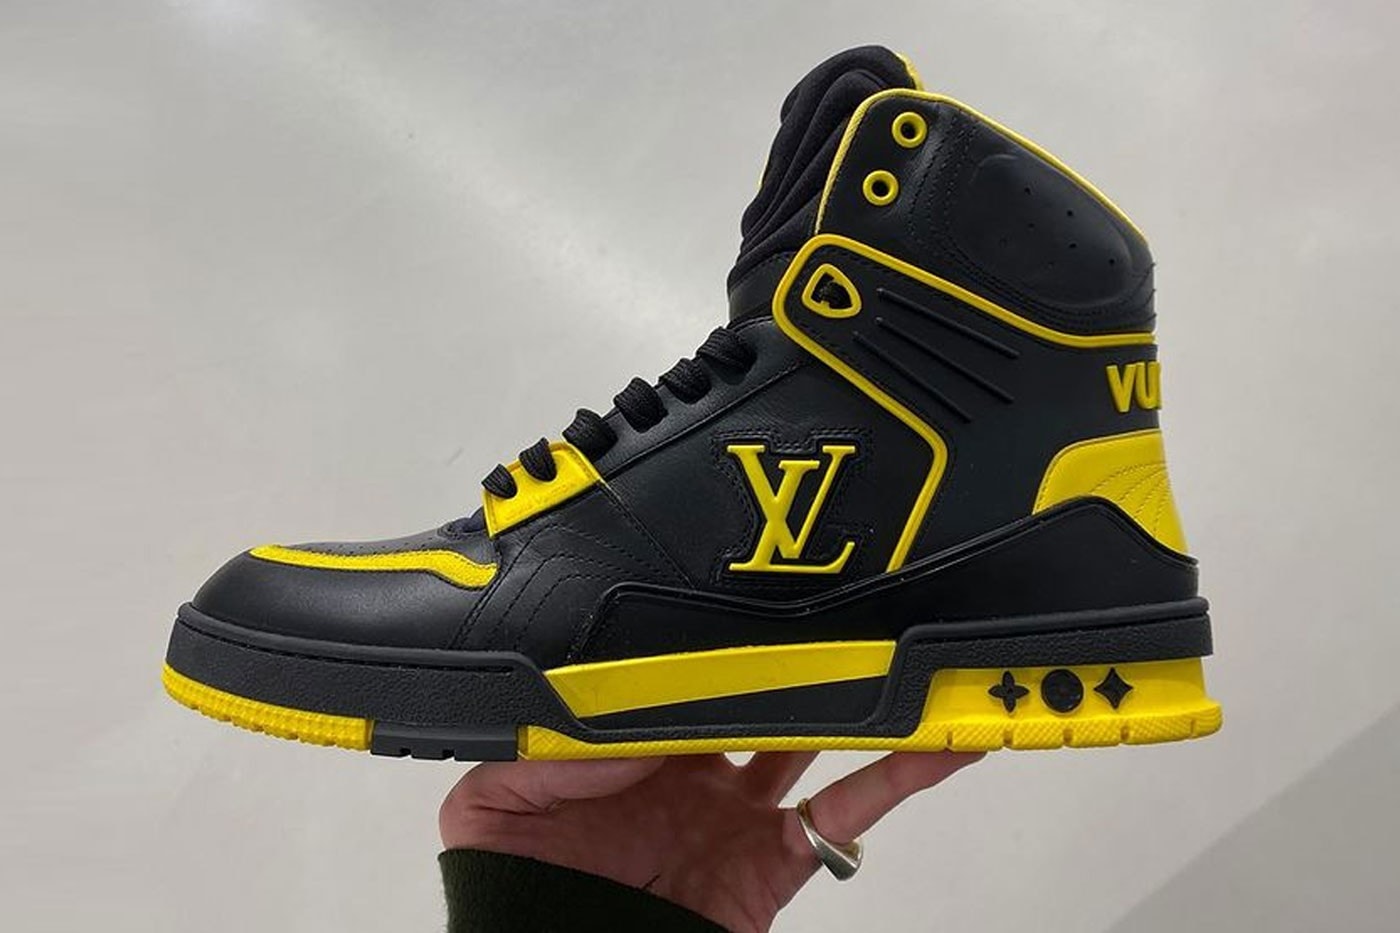 High Quality LOUIS VUITTON High 8 ET (LVSK8) Sneakers in Victoria Island -  Shoes, Bizzcouture Abiola